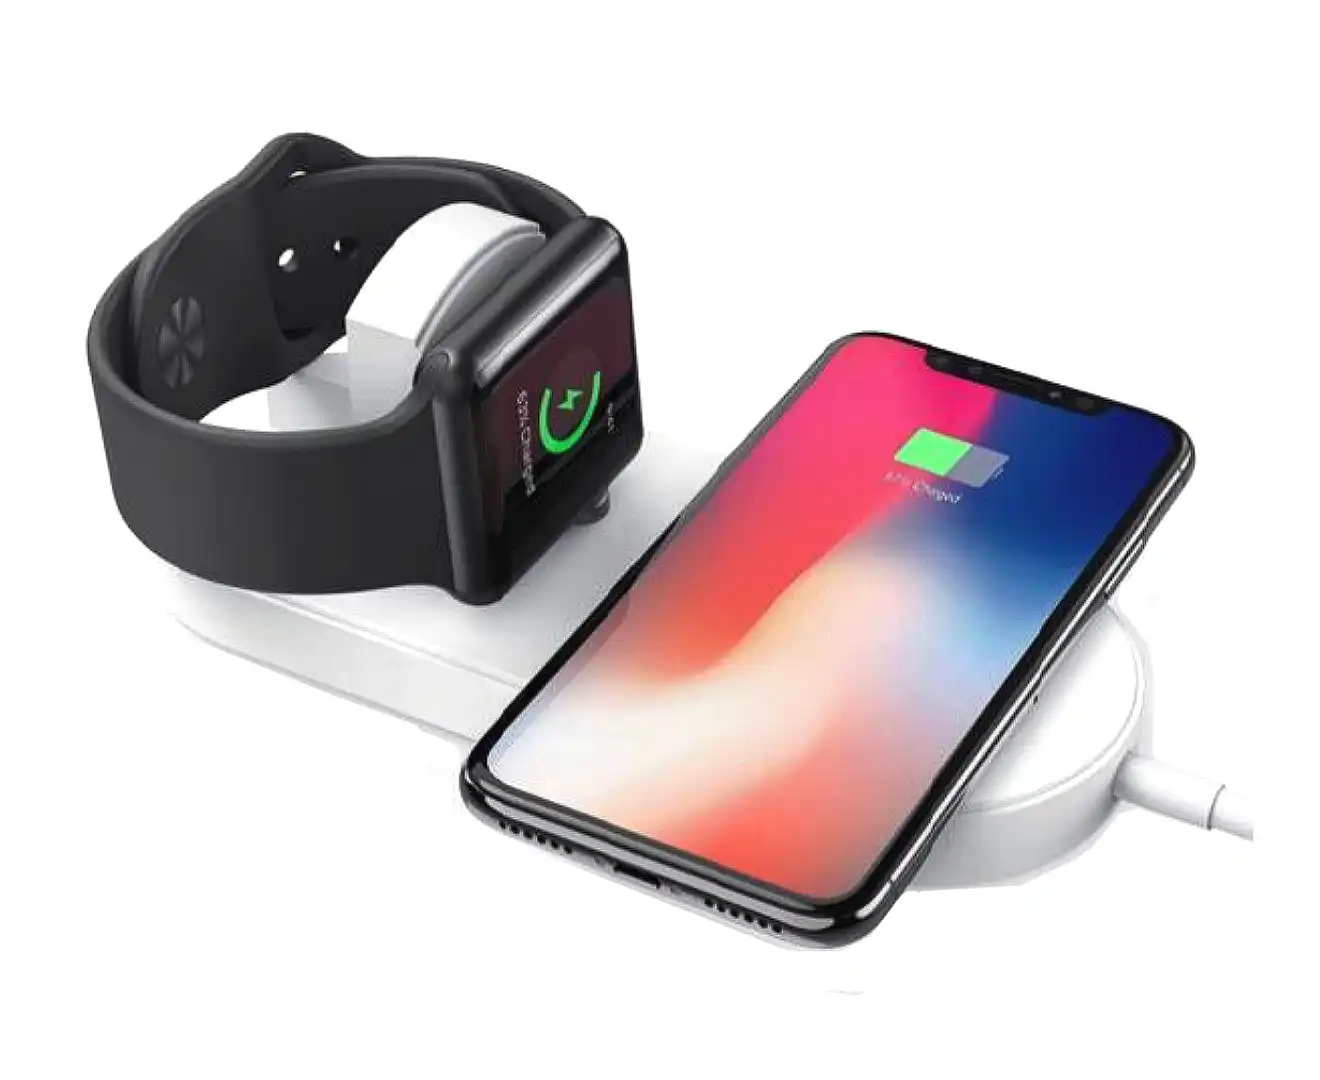 10W 2-in-1 Dual Wireless Charging Pad (including for Apple Watch)